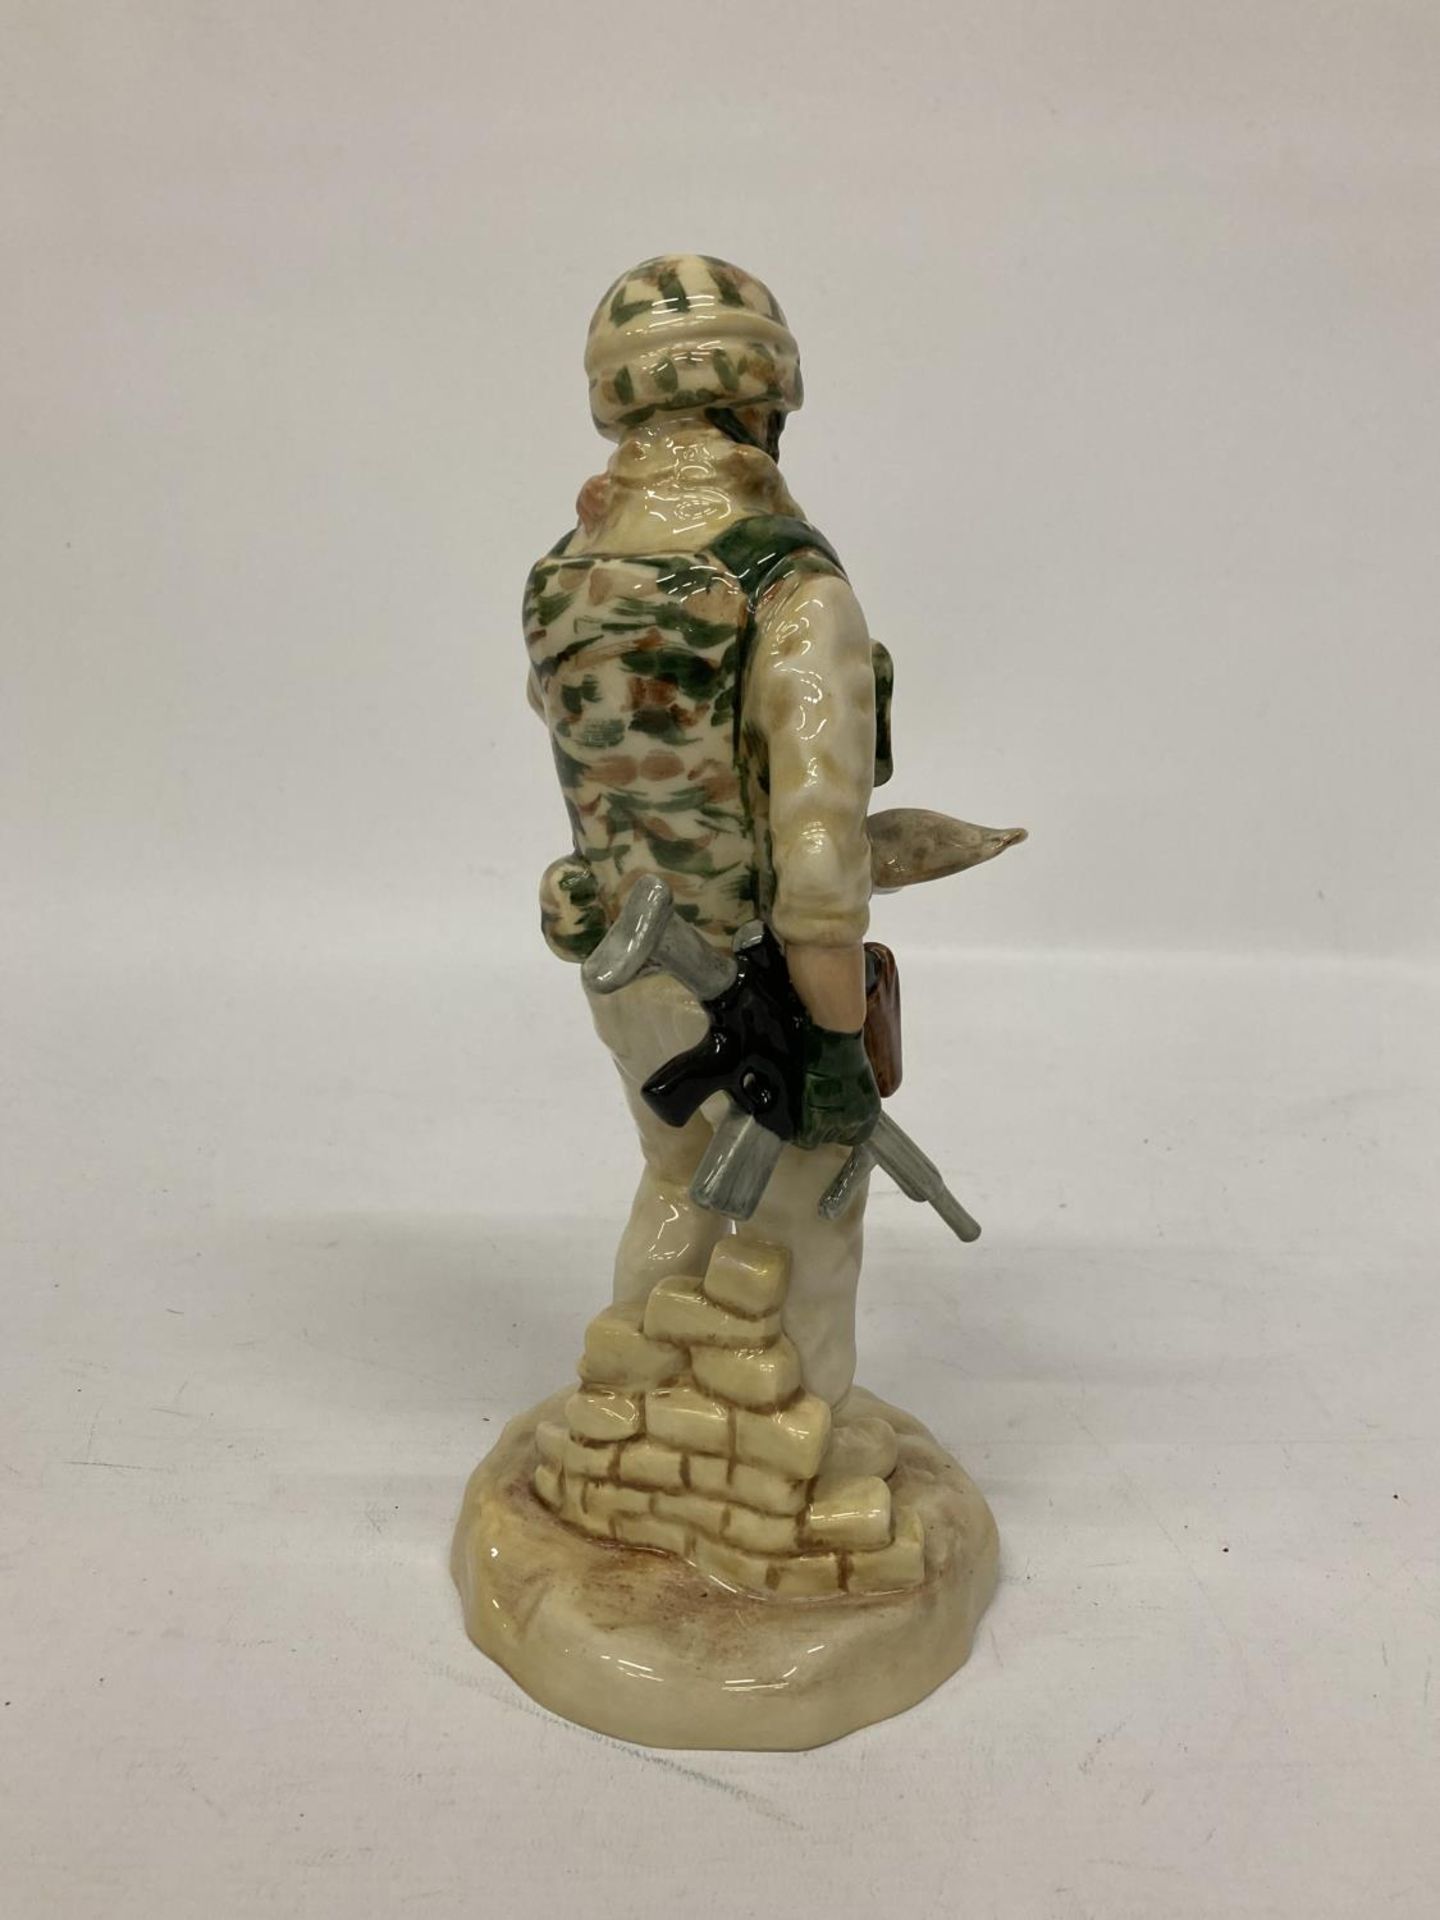 A CERAMIC SCULPTURE BY PEGGY DAVIES "IN THE ARMS OF A HERO" MODELLED BY ANDY MOSS - LIMITED - Image 3 of 5